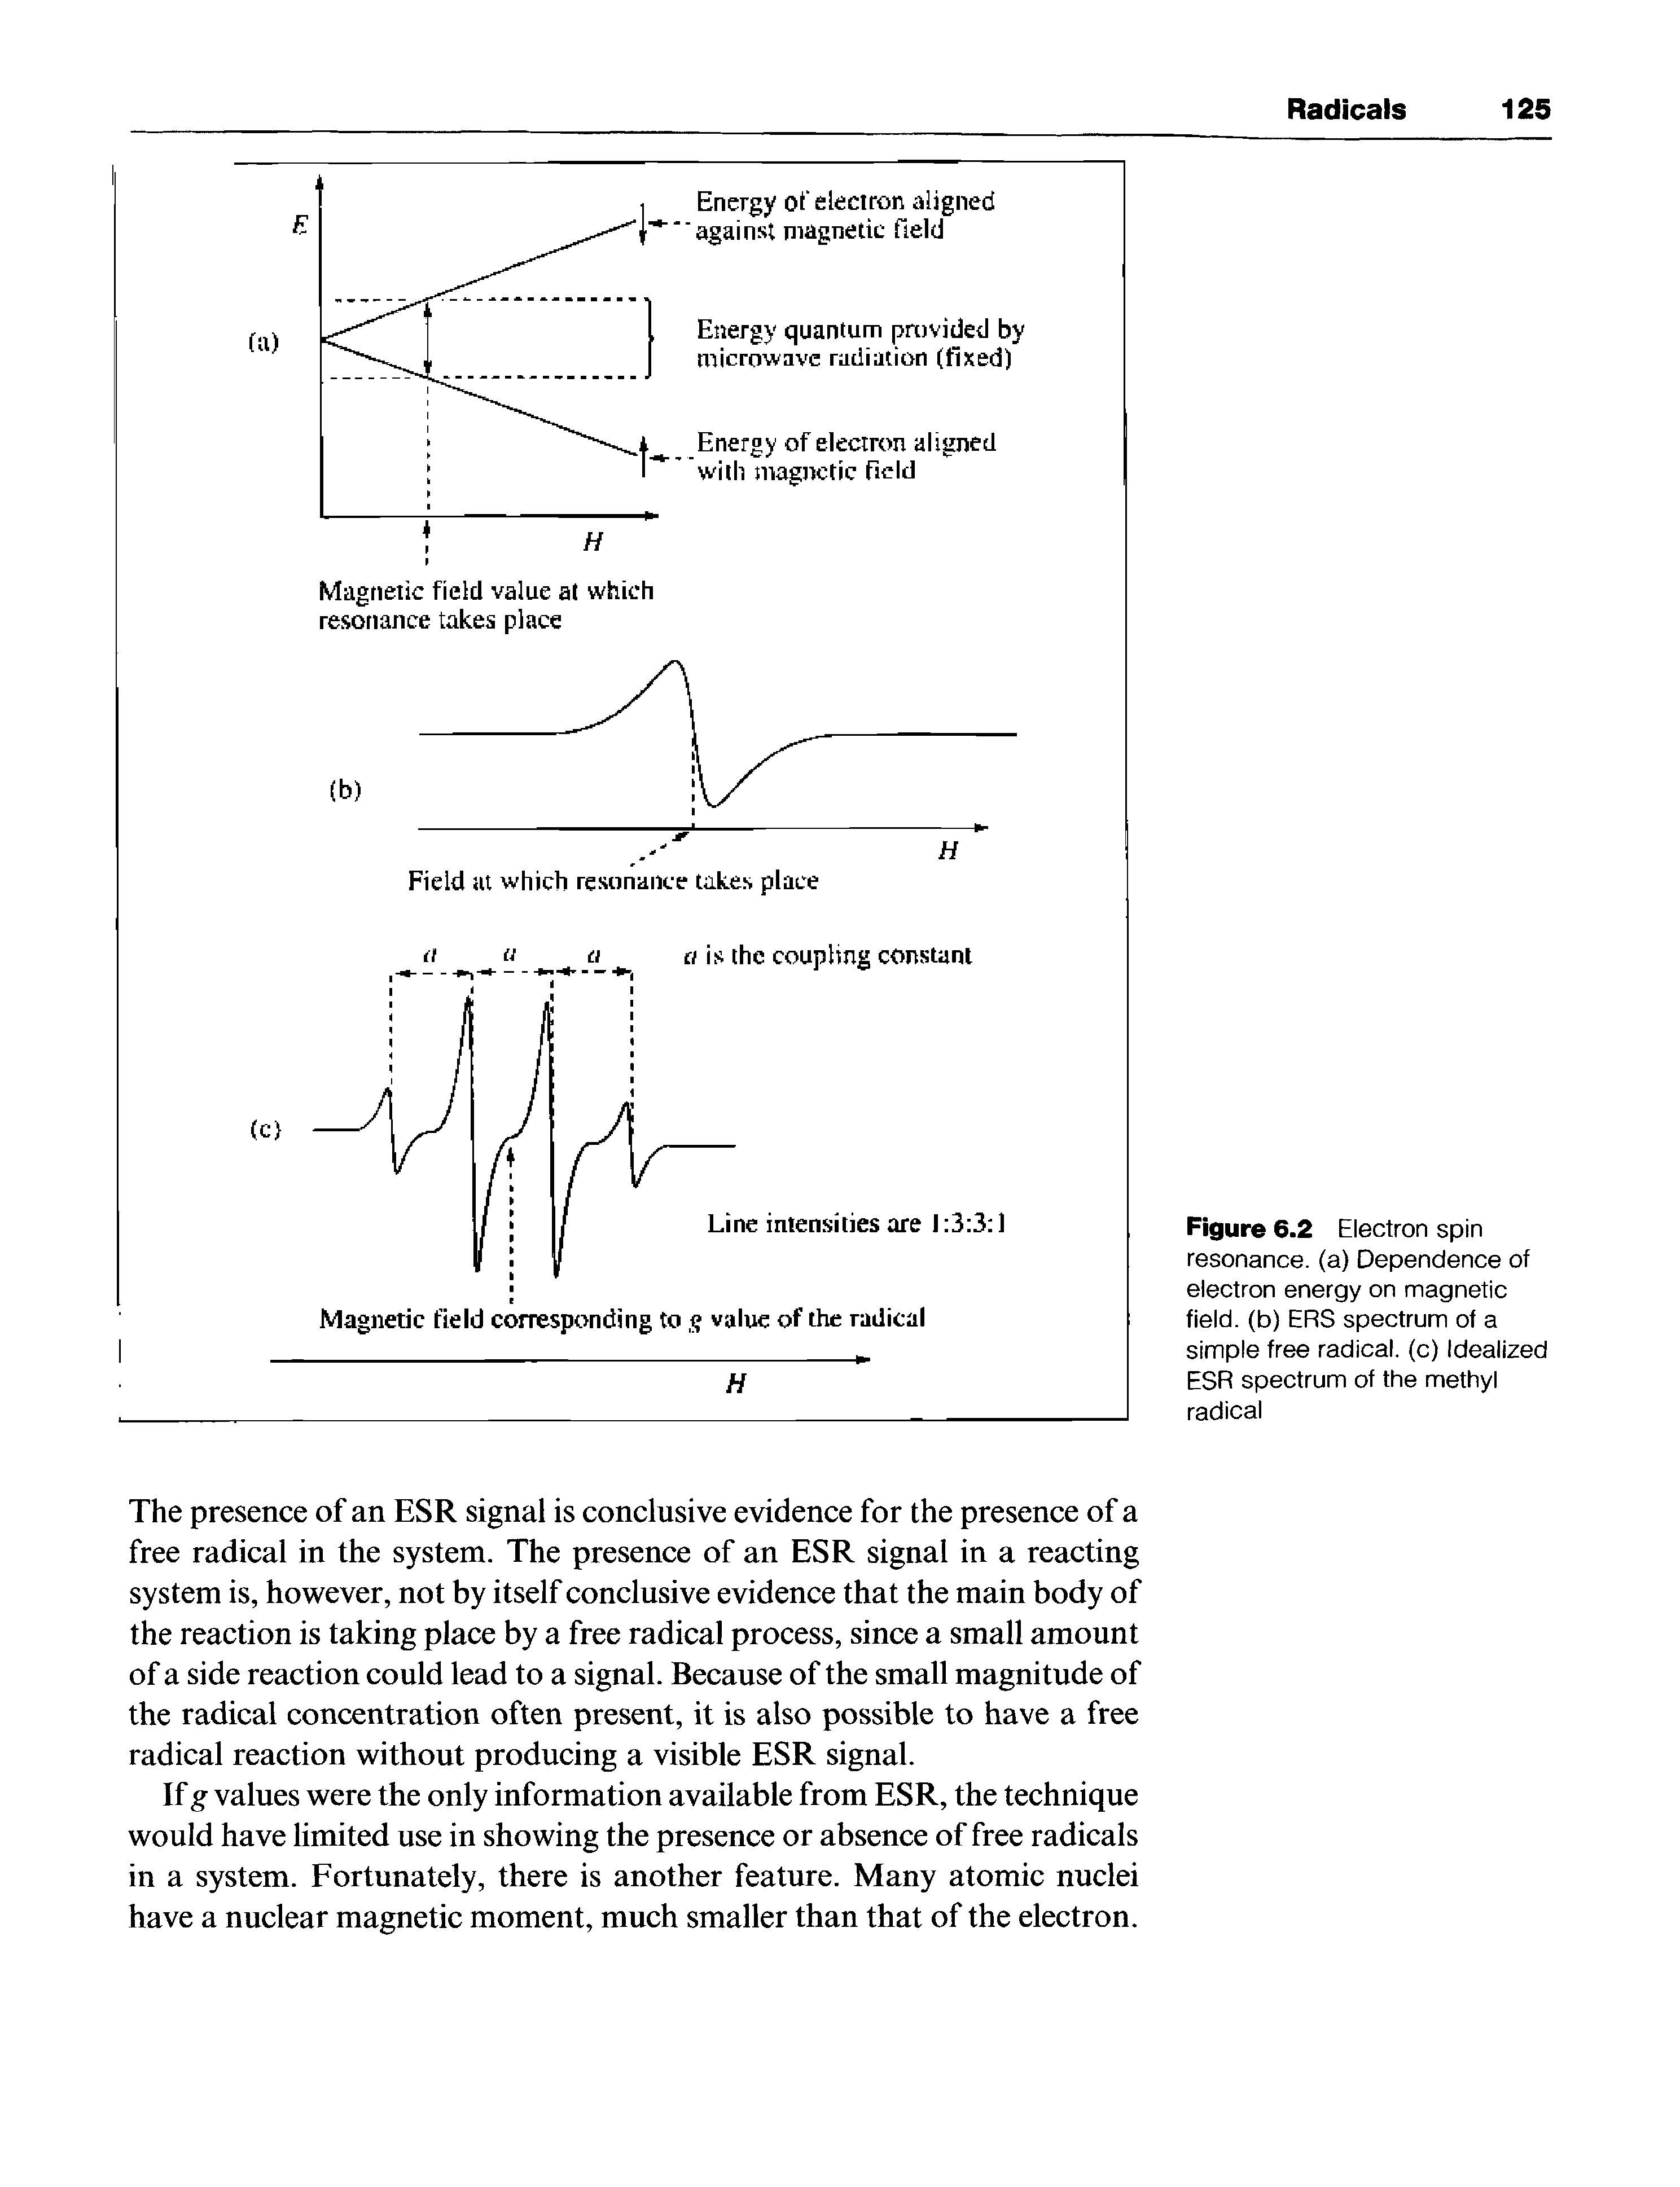 Figure 6.2 Electron spin resonance, (a) Dependence of electron energy on magnetic field, (b) ERS spectrum of a simple free radical, (c) Idealized ESR spectrum of the methyl radical...